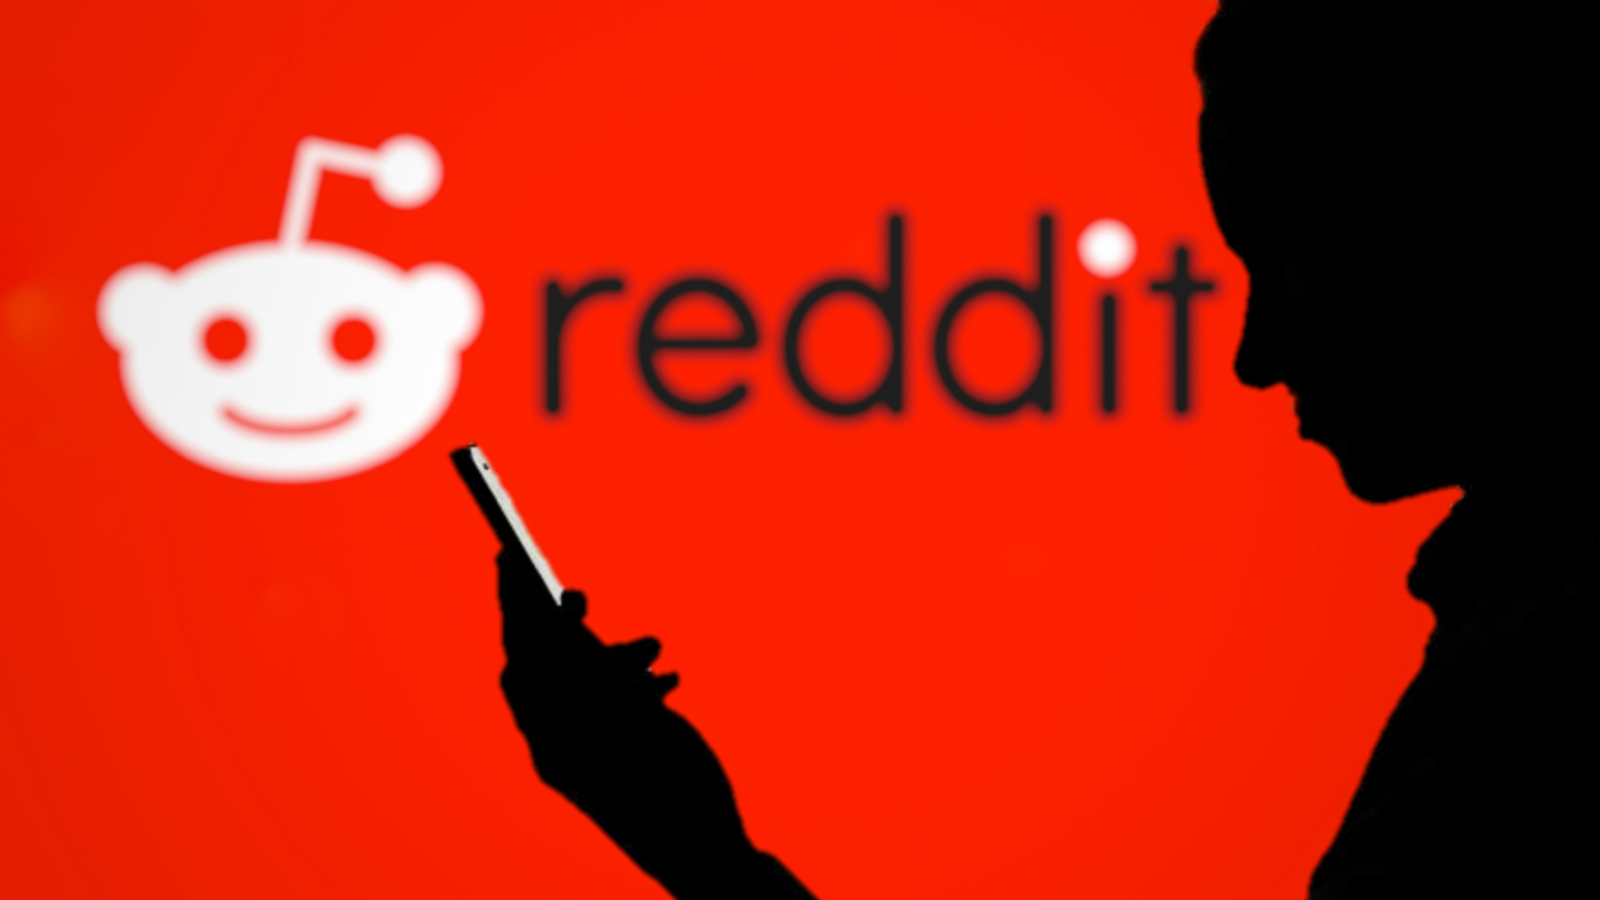 Reddit Stock Earnings Preview: Should You Buy RDDT Ahead of Its May 7 Report?